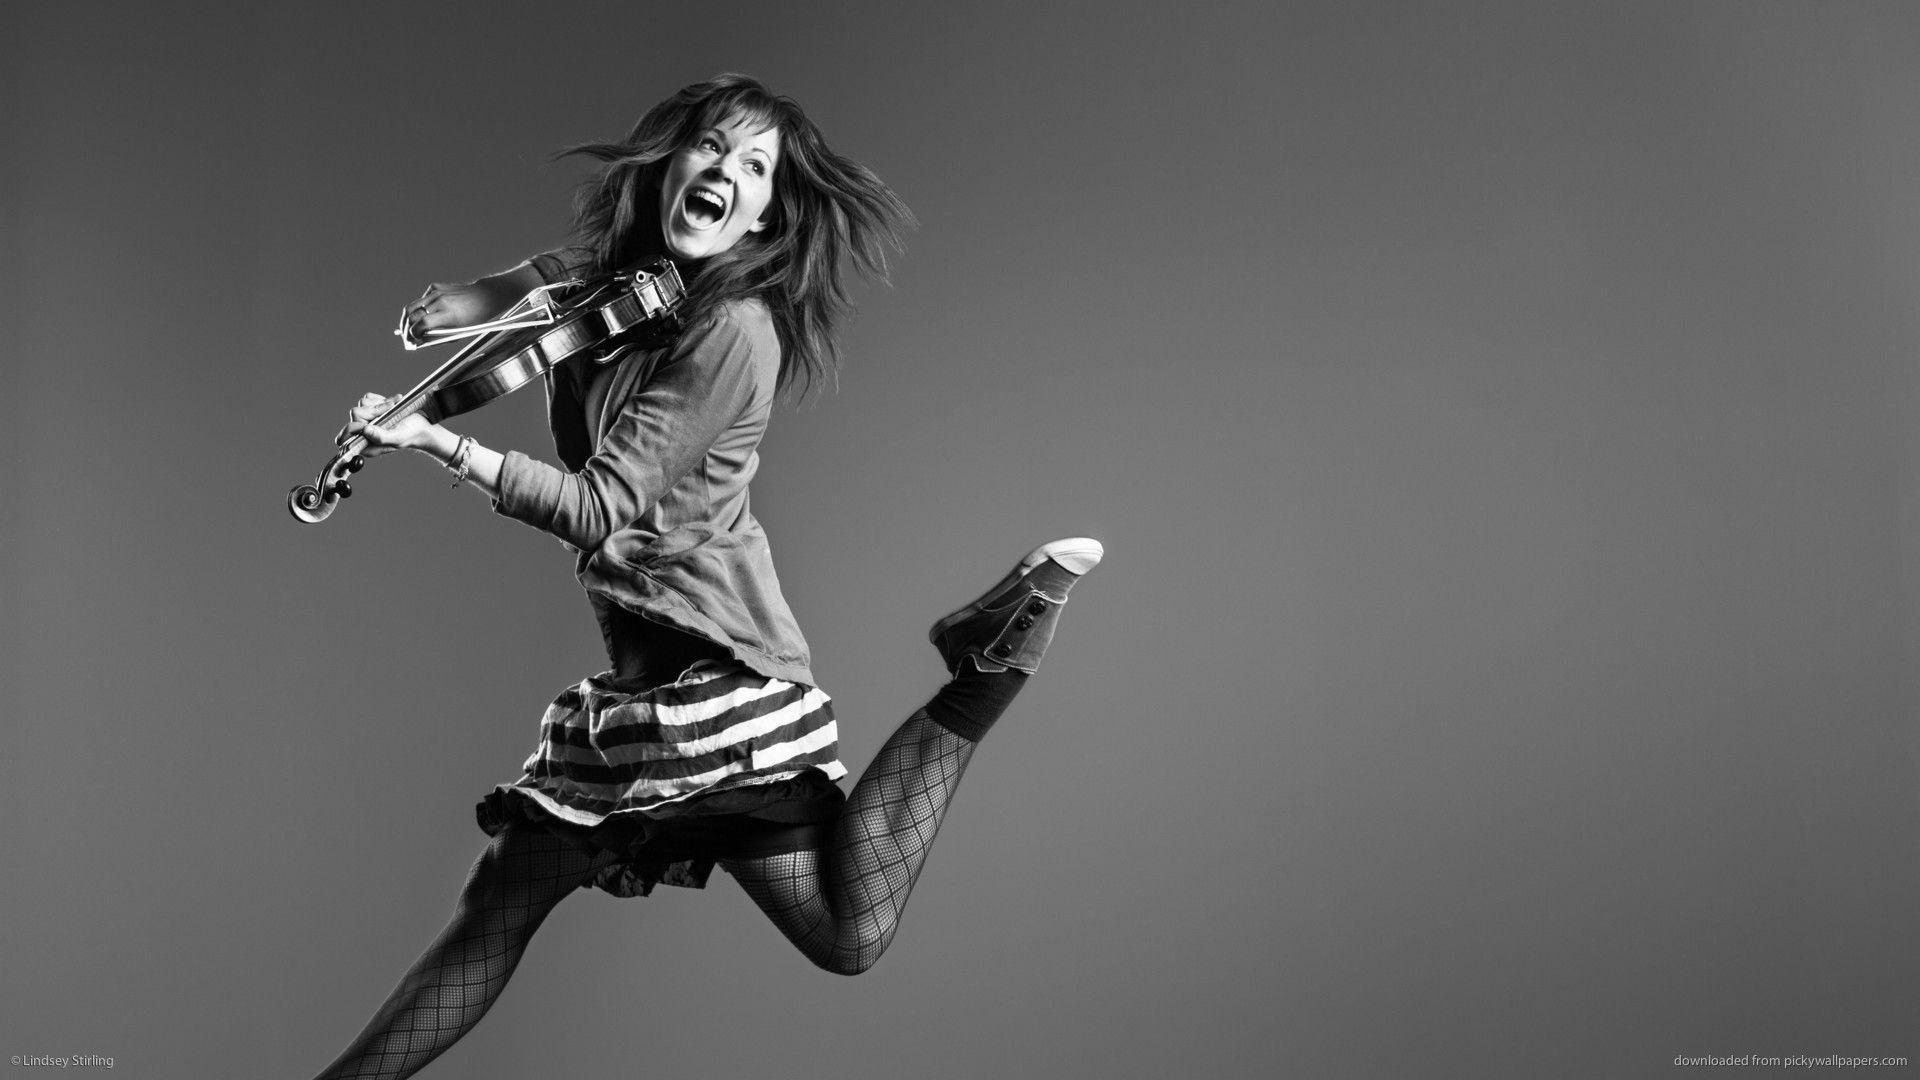 Download 1920x1080 Lindsey Stirling Grayscale Jump Wallpaper